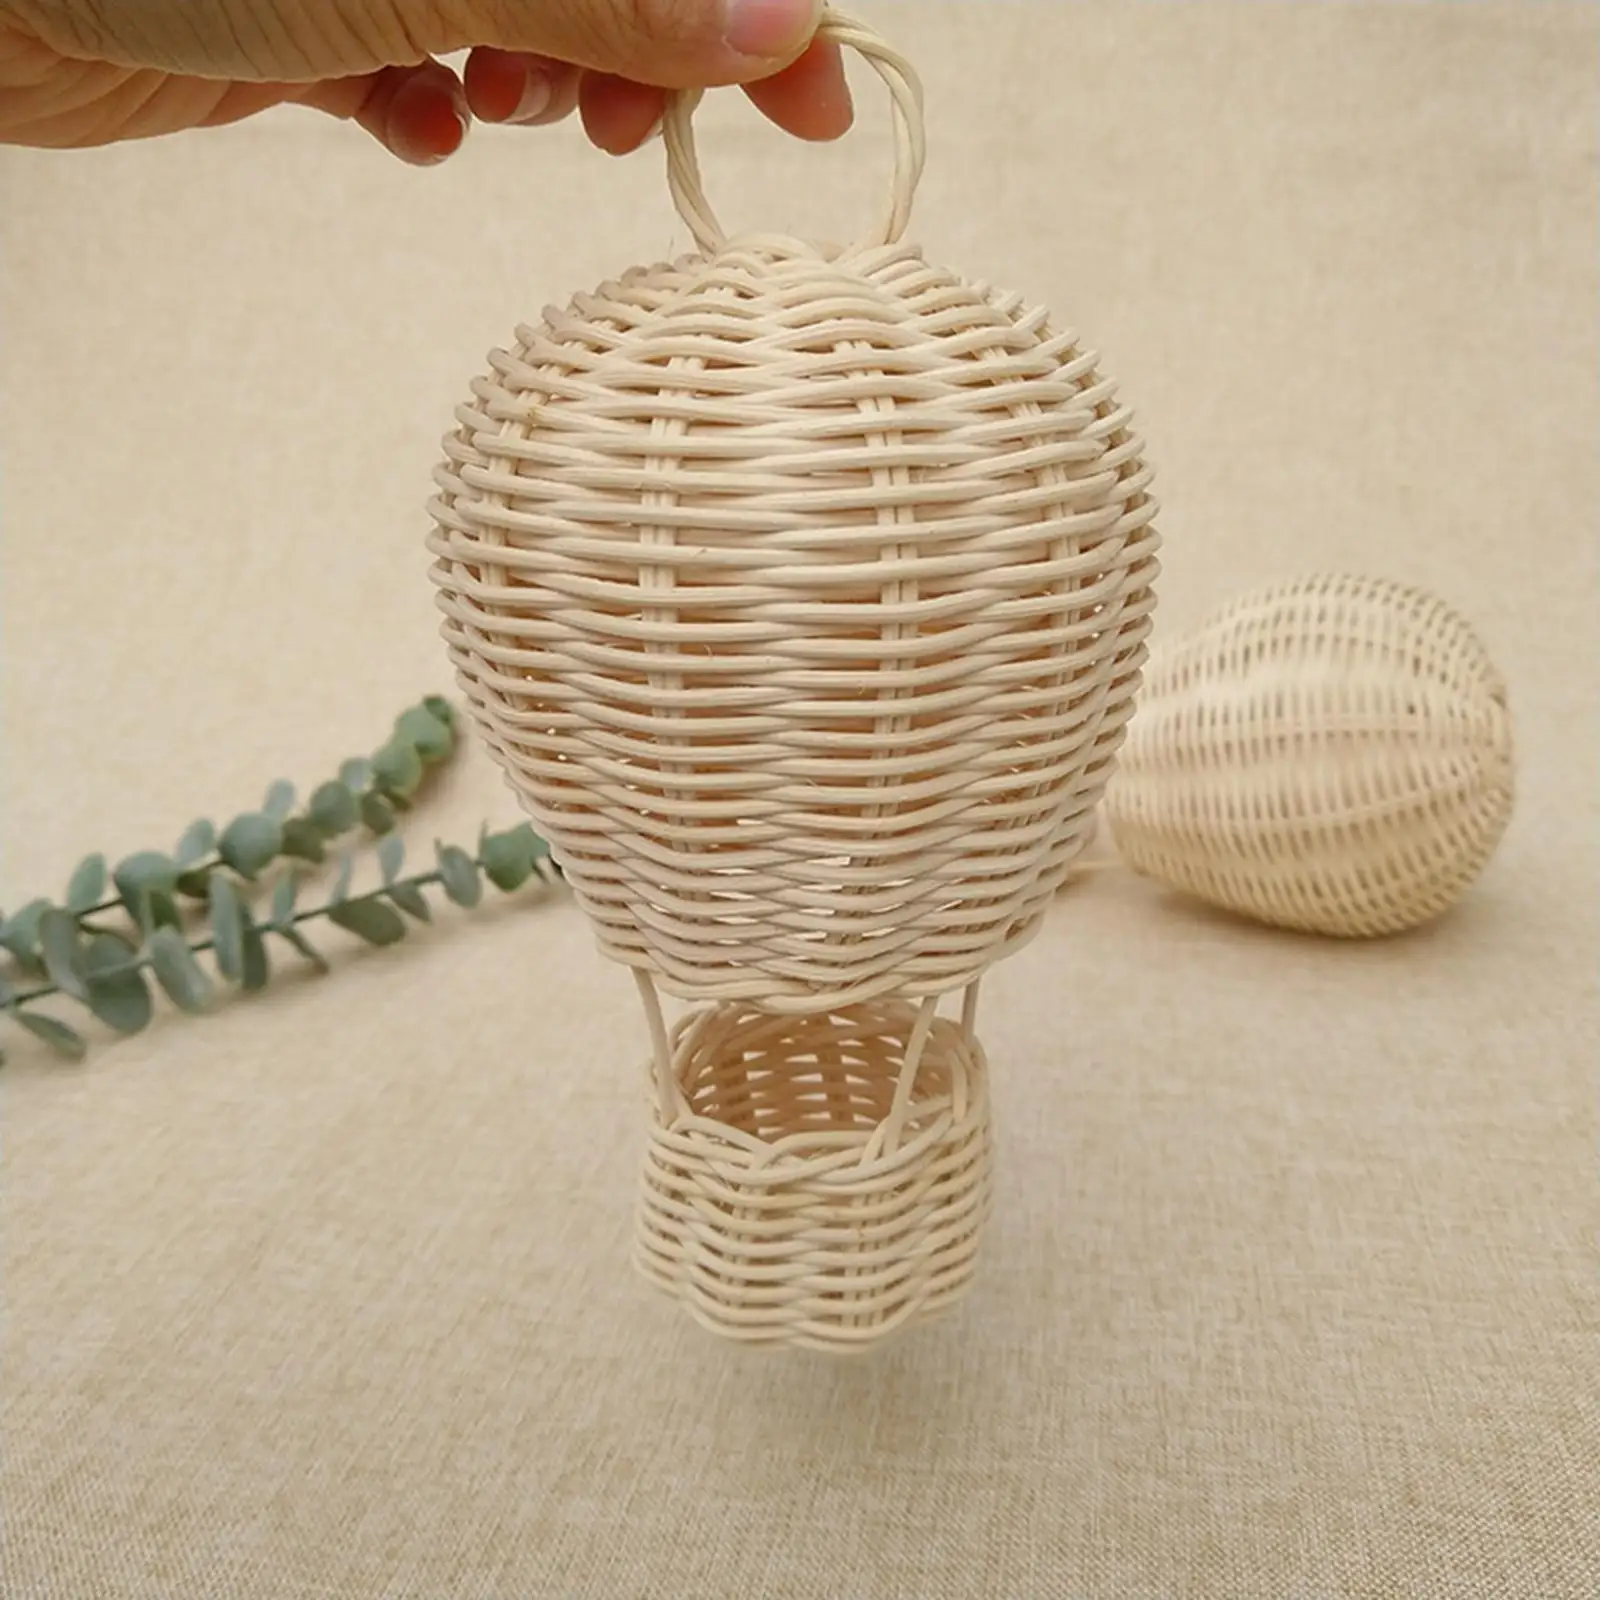 Unique Rattan Hot Air Balloon Decor Crafts for Home Wall Hanging Ornament